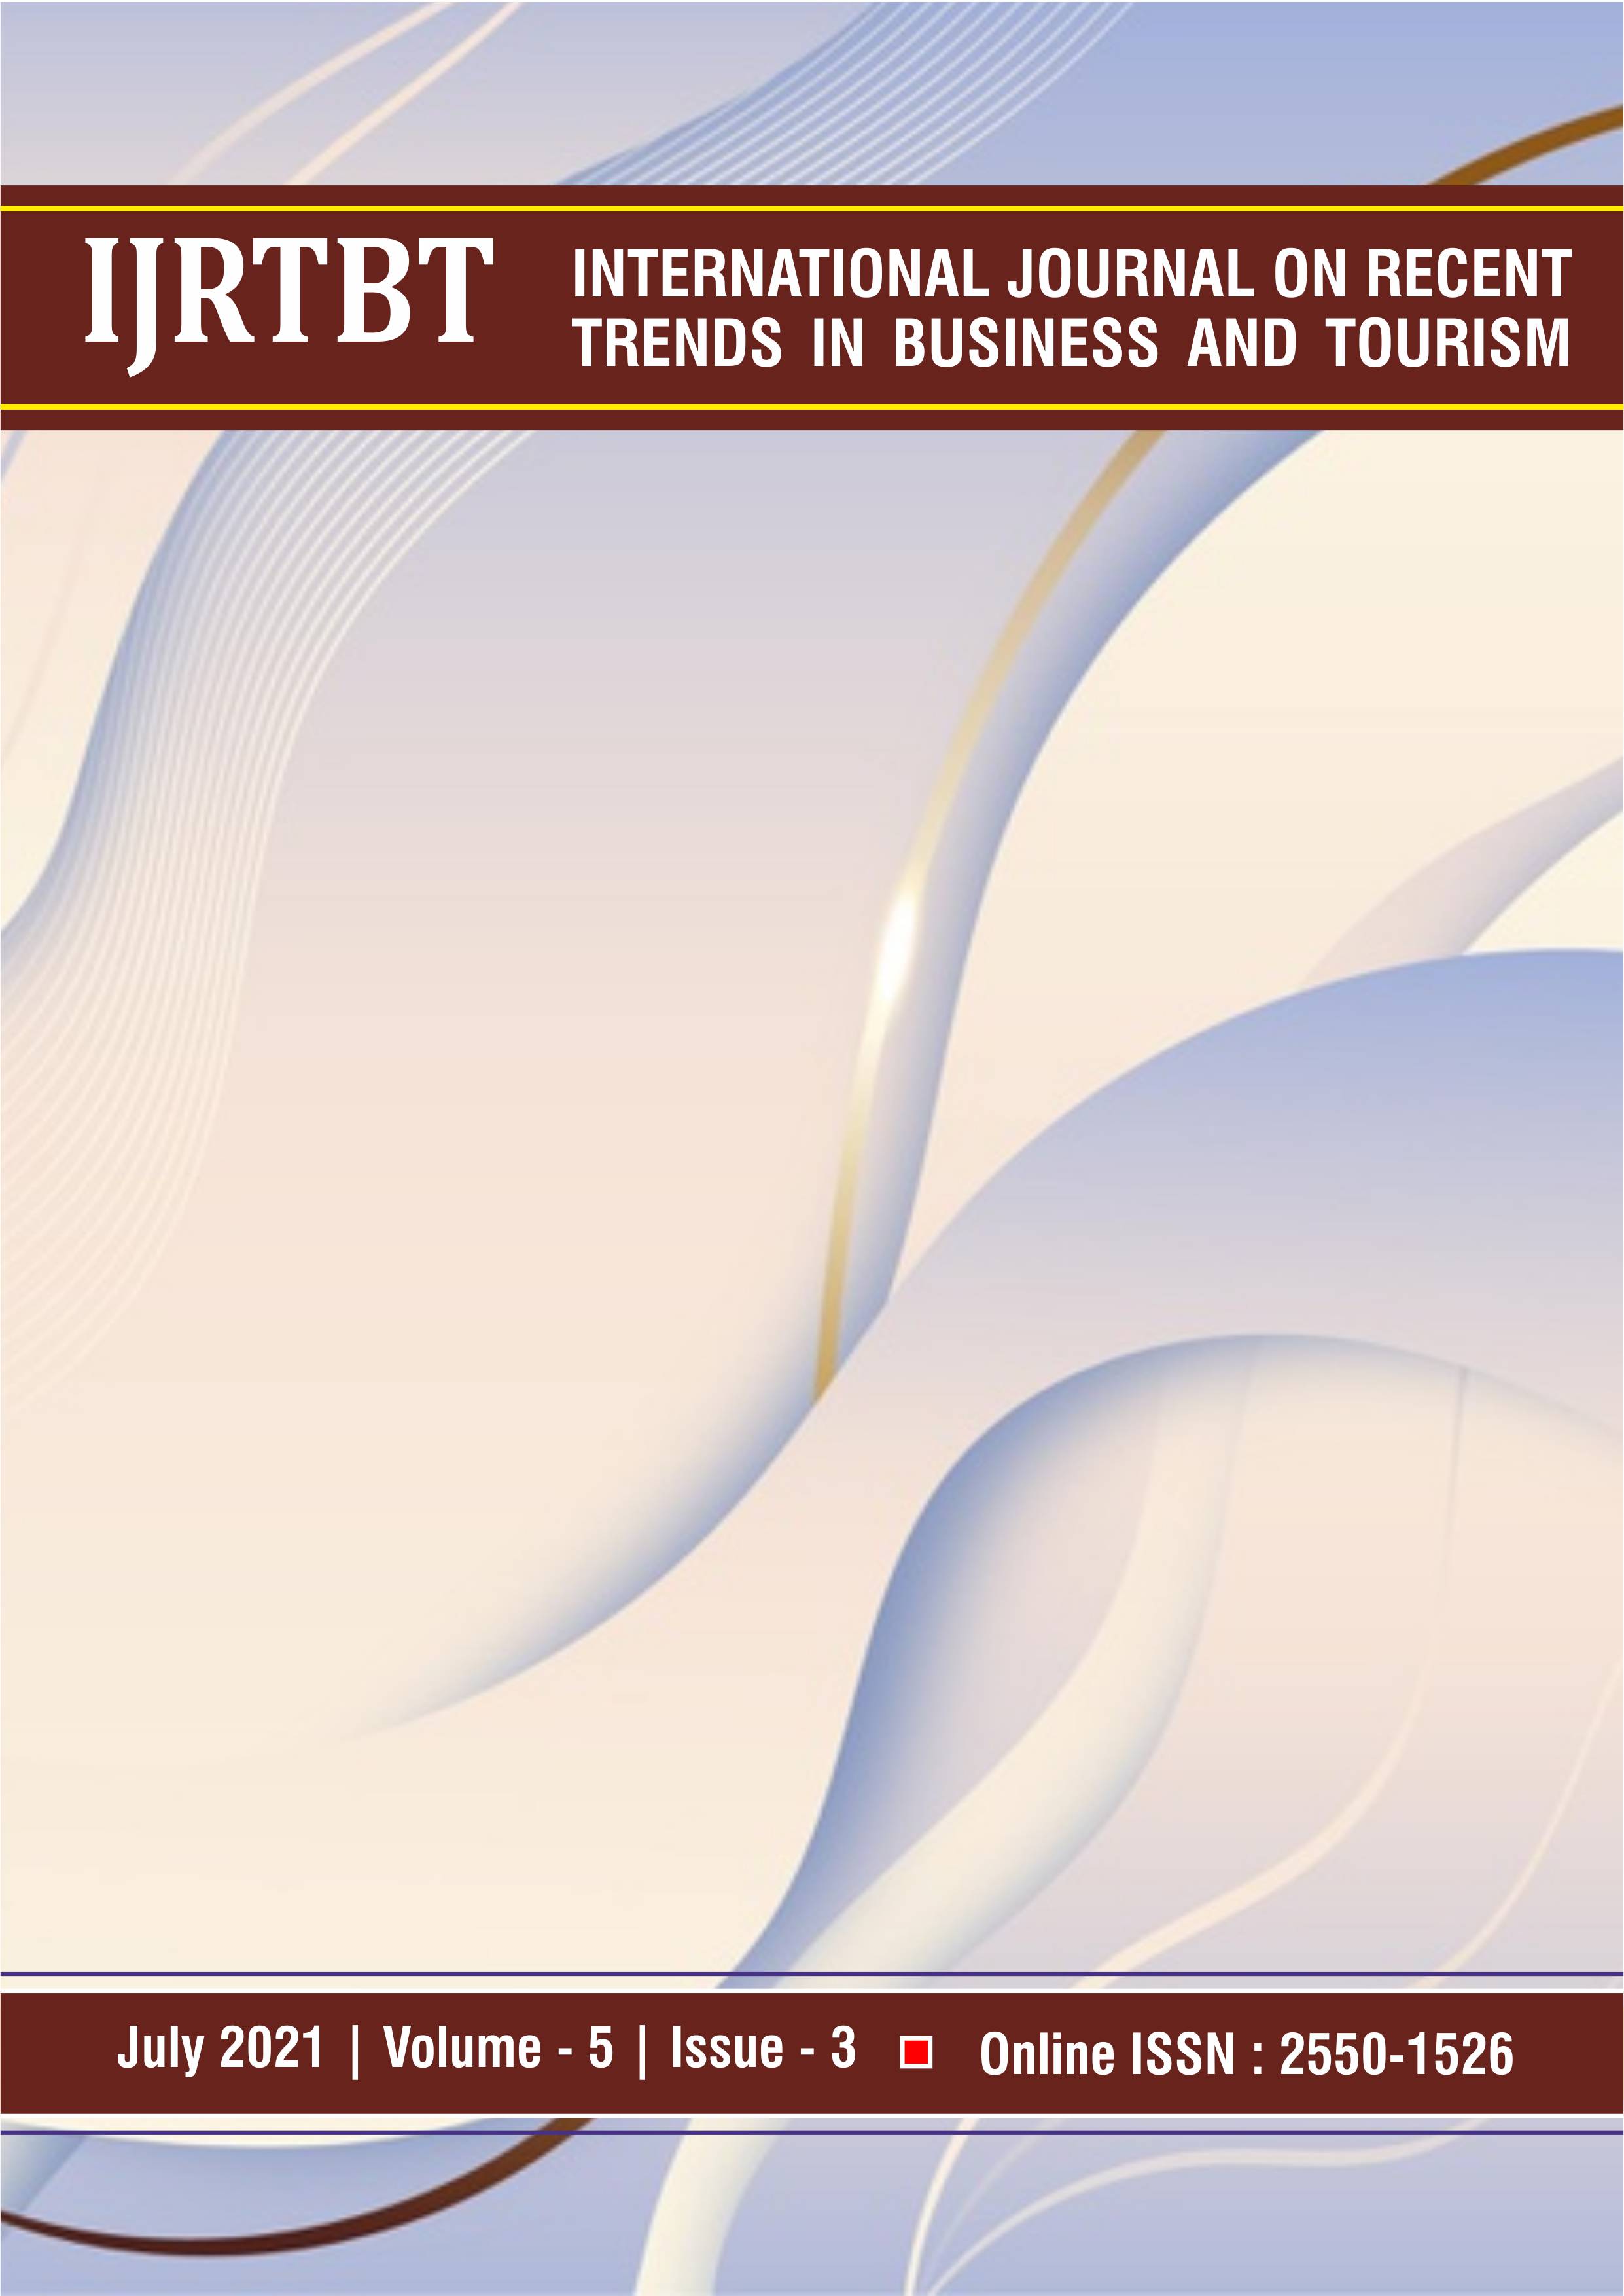 					View Vol. 5 No. 3 (2021): International Journal on Recent Trends in Business and Tourism
				